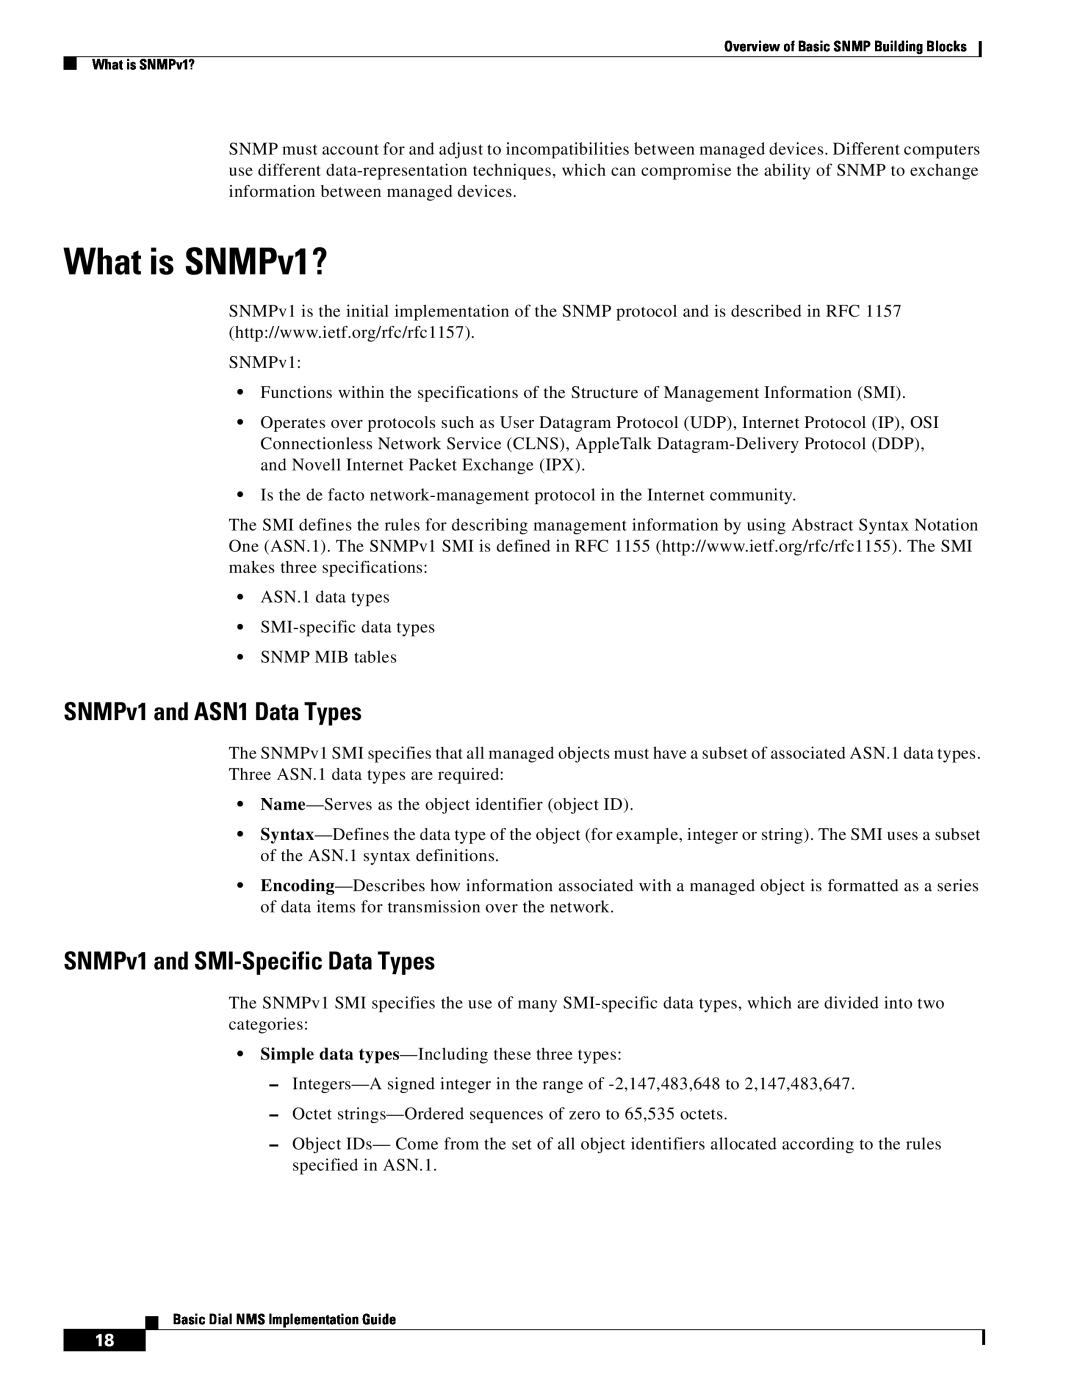 Cisco Systems Dial NMS manual What is SNMPv1?, SNMPv1 and ASN1 Data Types, SNMPv1 and SMI-Specific Data Types 